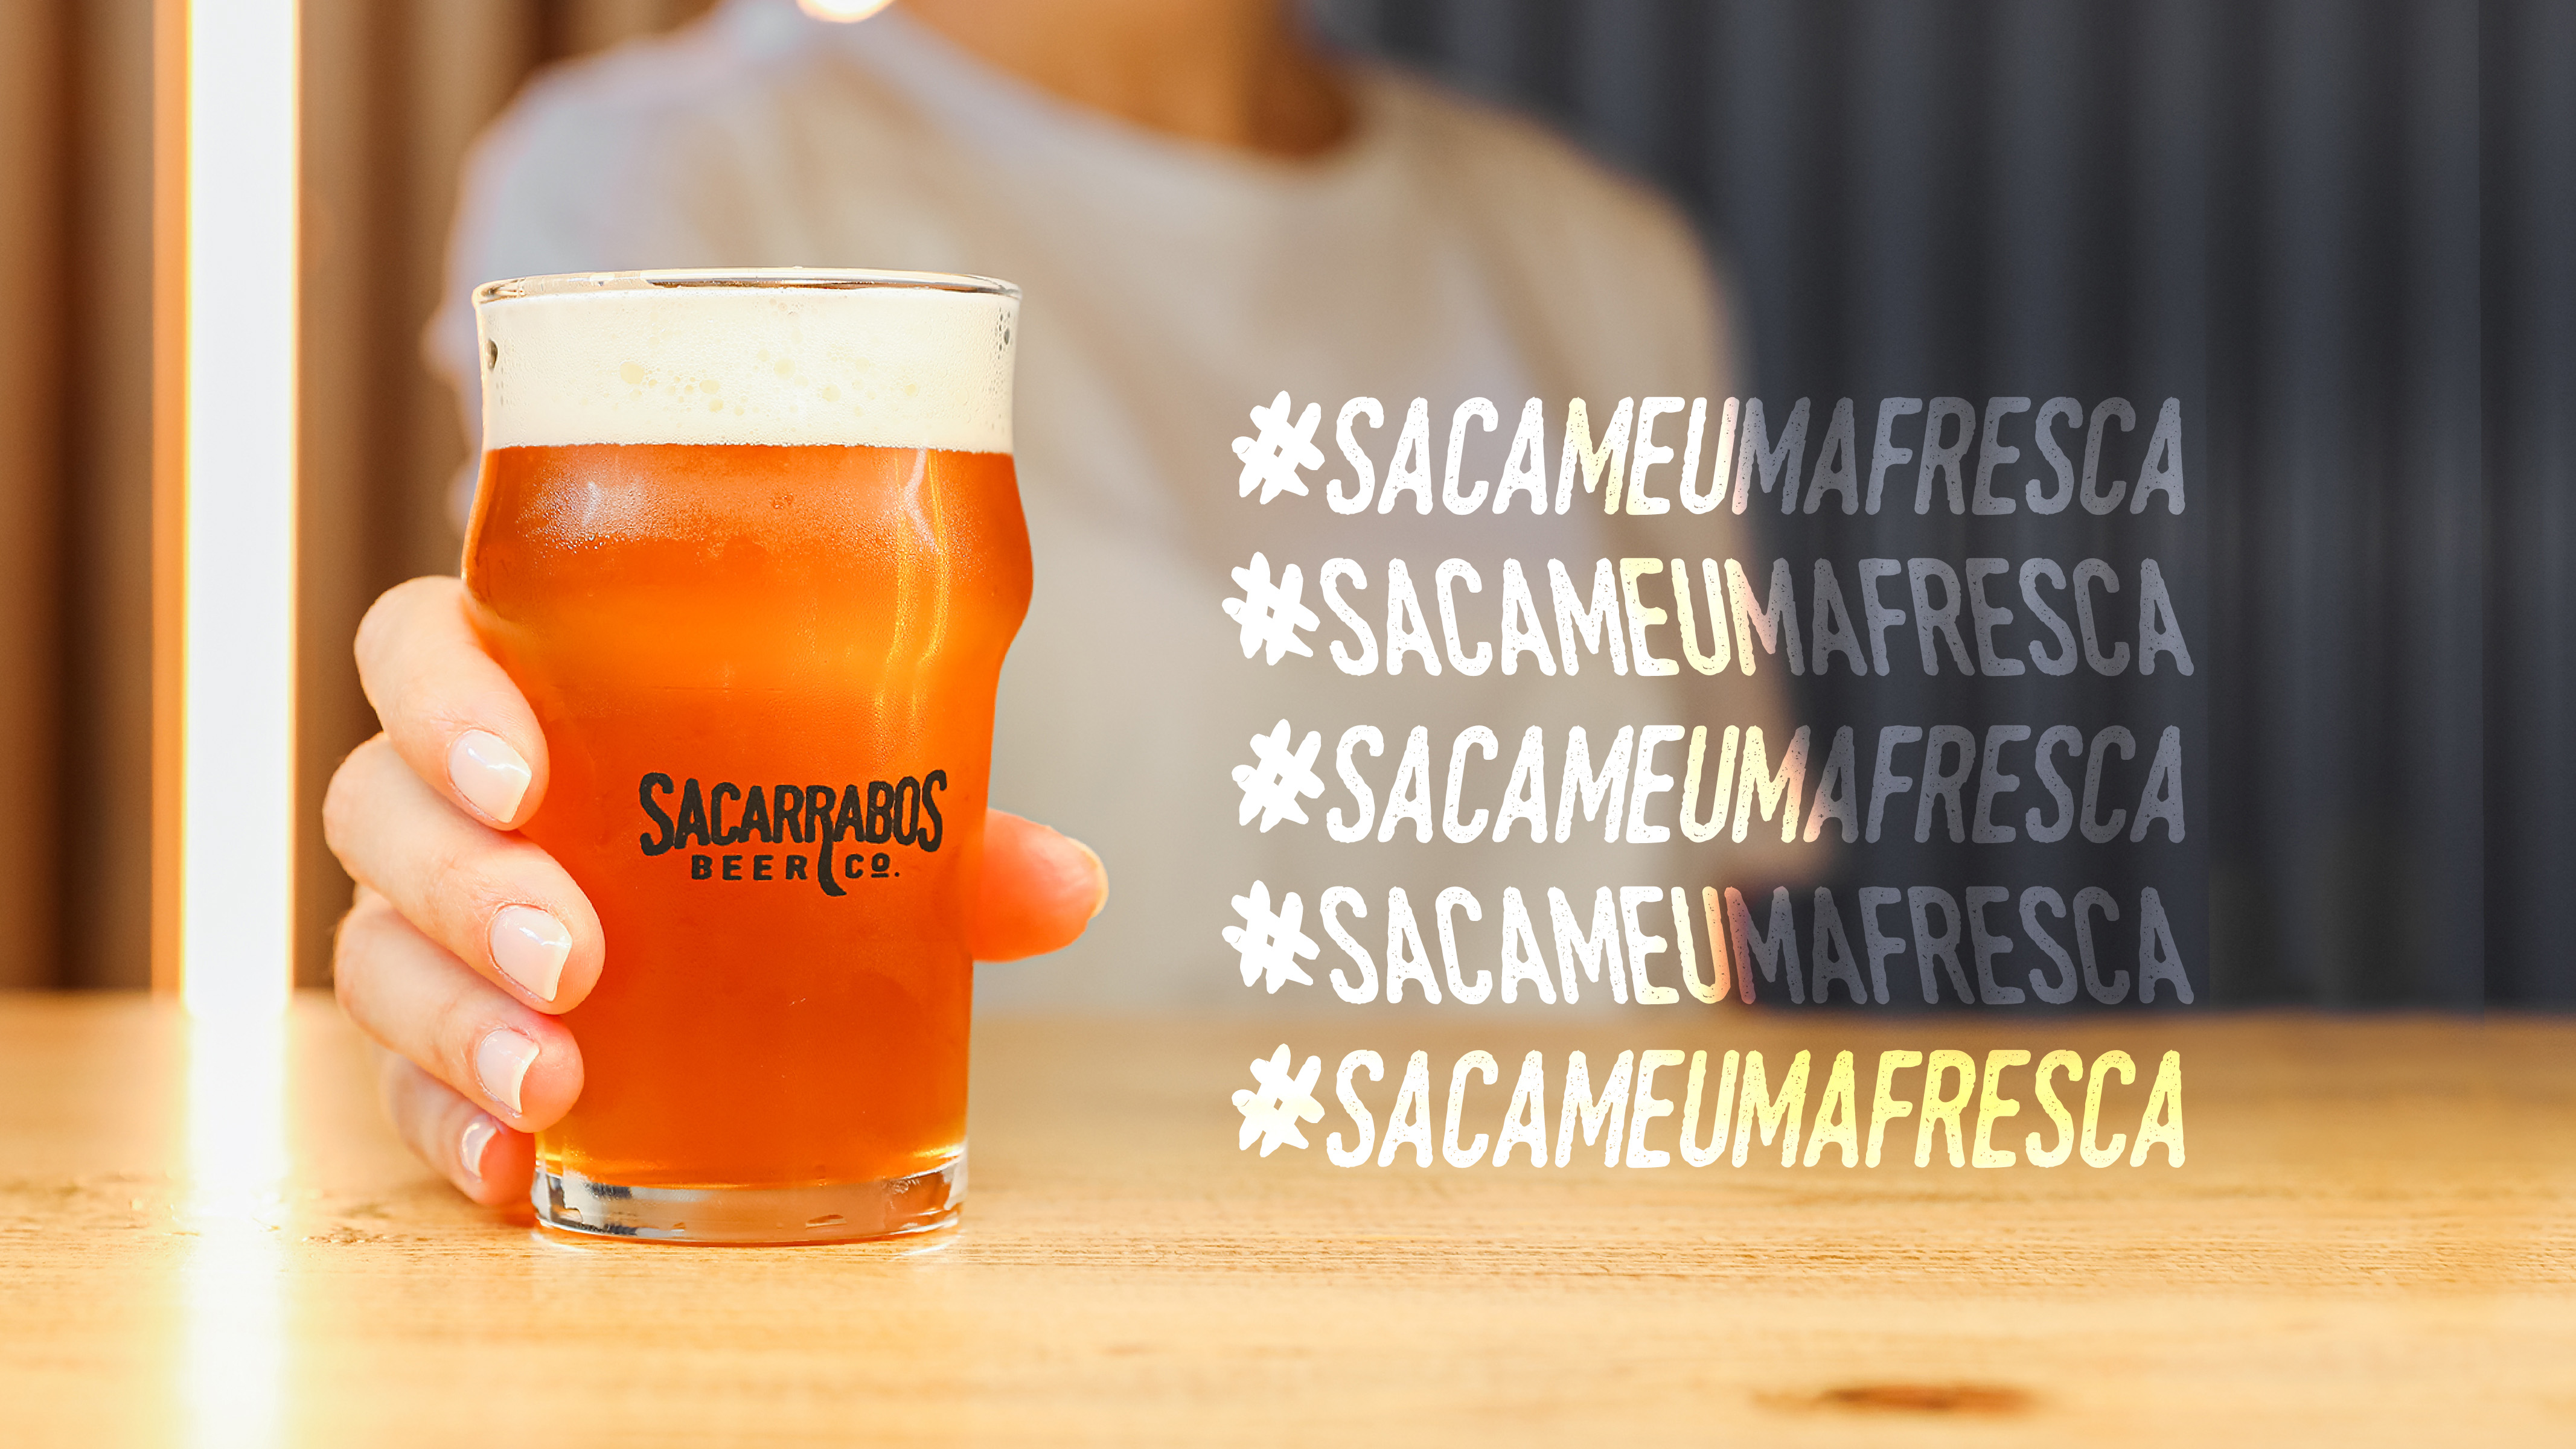 Rebranding of Sacarrabos Beer Co. by Portuguese Agency d’front